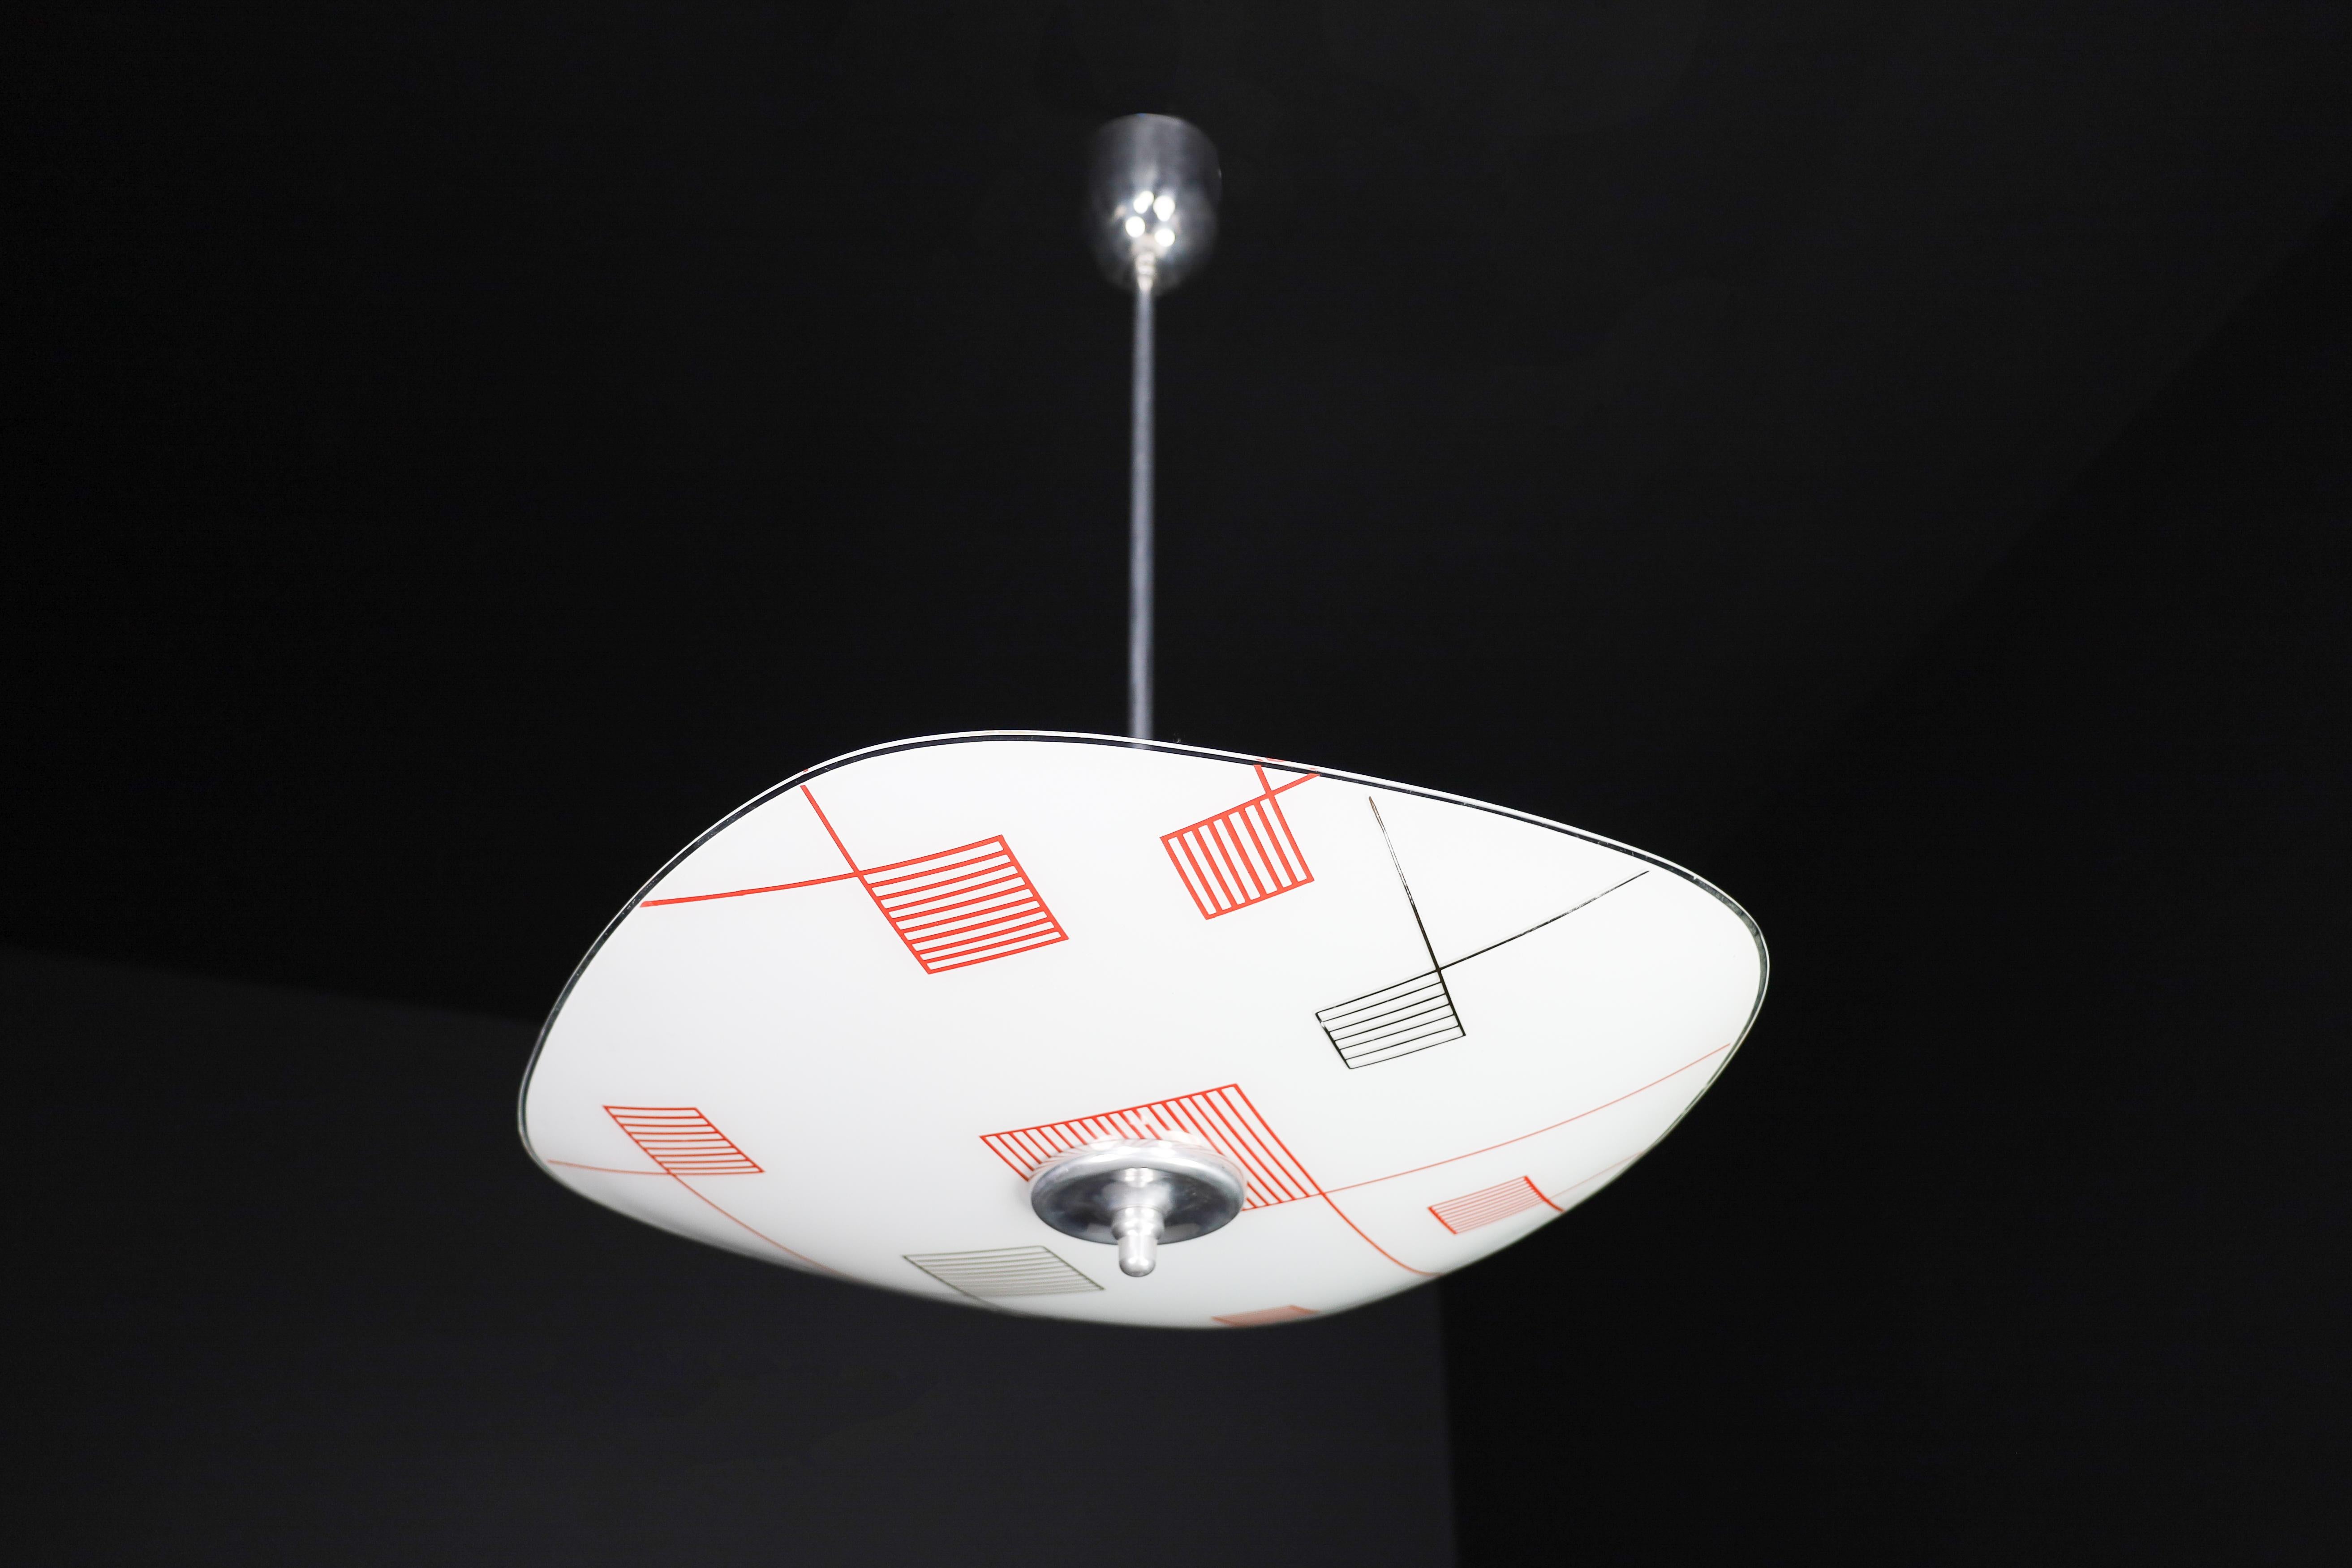 Mid-Century Glass Hanging Pendant Lamp Brussels World Expo 1958 (5115)

This pendant lamp is a magnificent piece of mid-century graphics and design that was showcased at the Czechoslovakia Pavilion during the Brussels World Fair in 1958. The shade